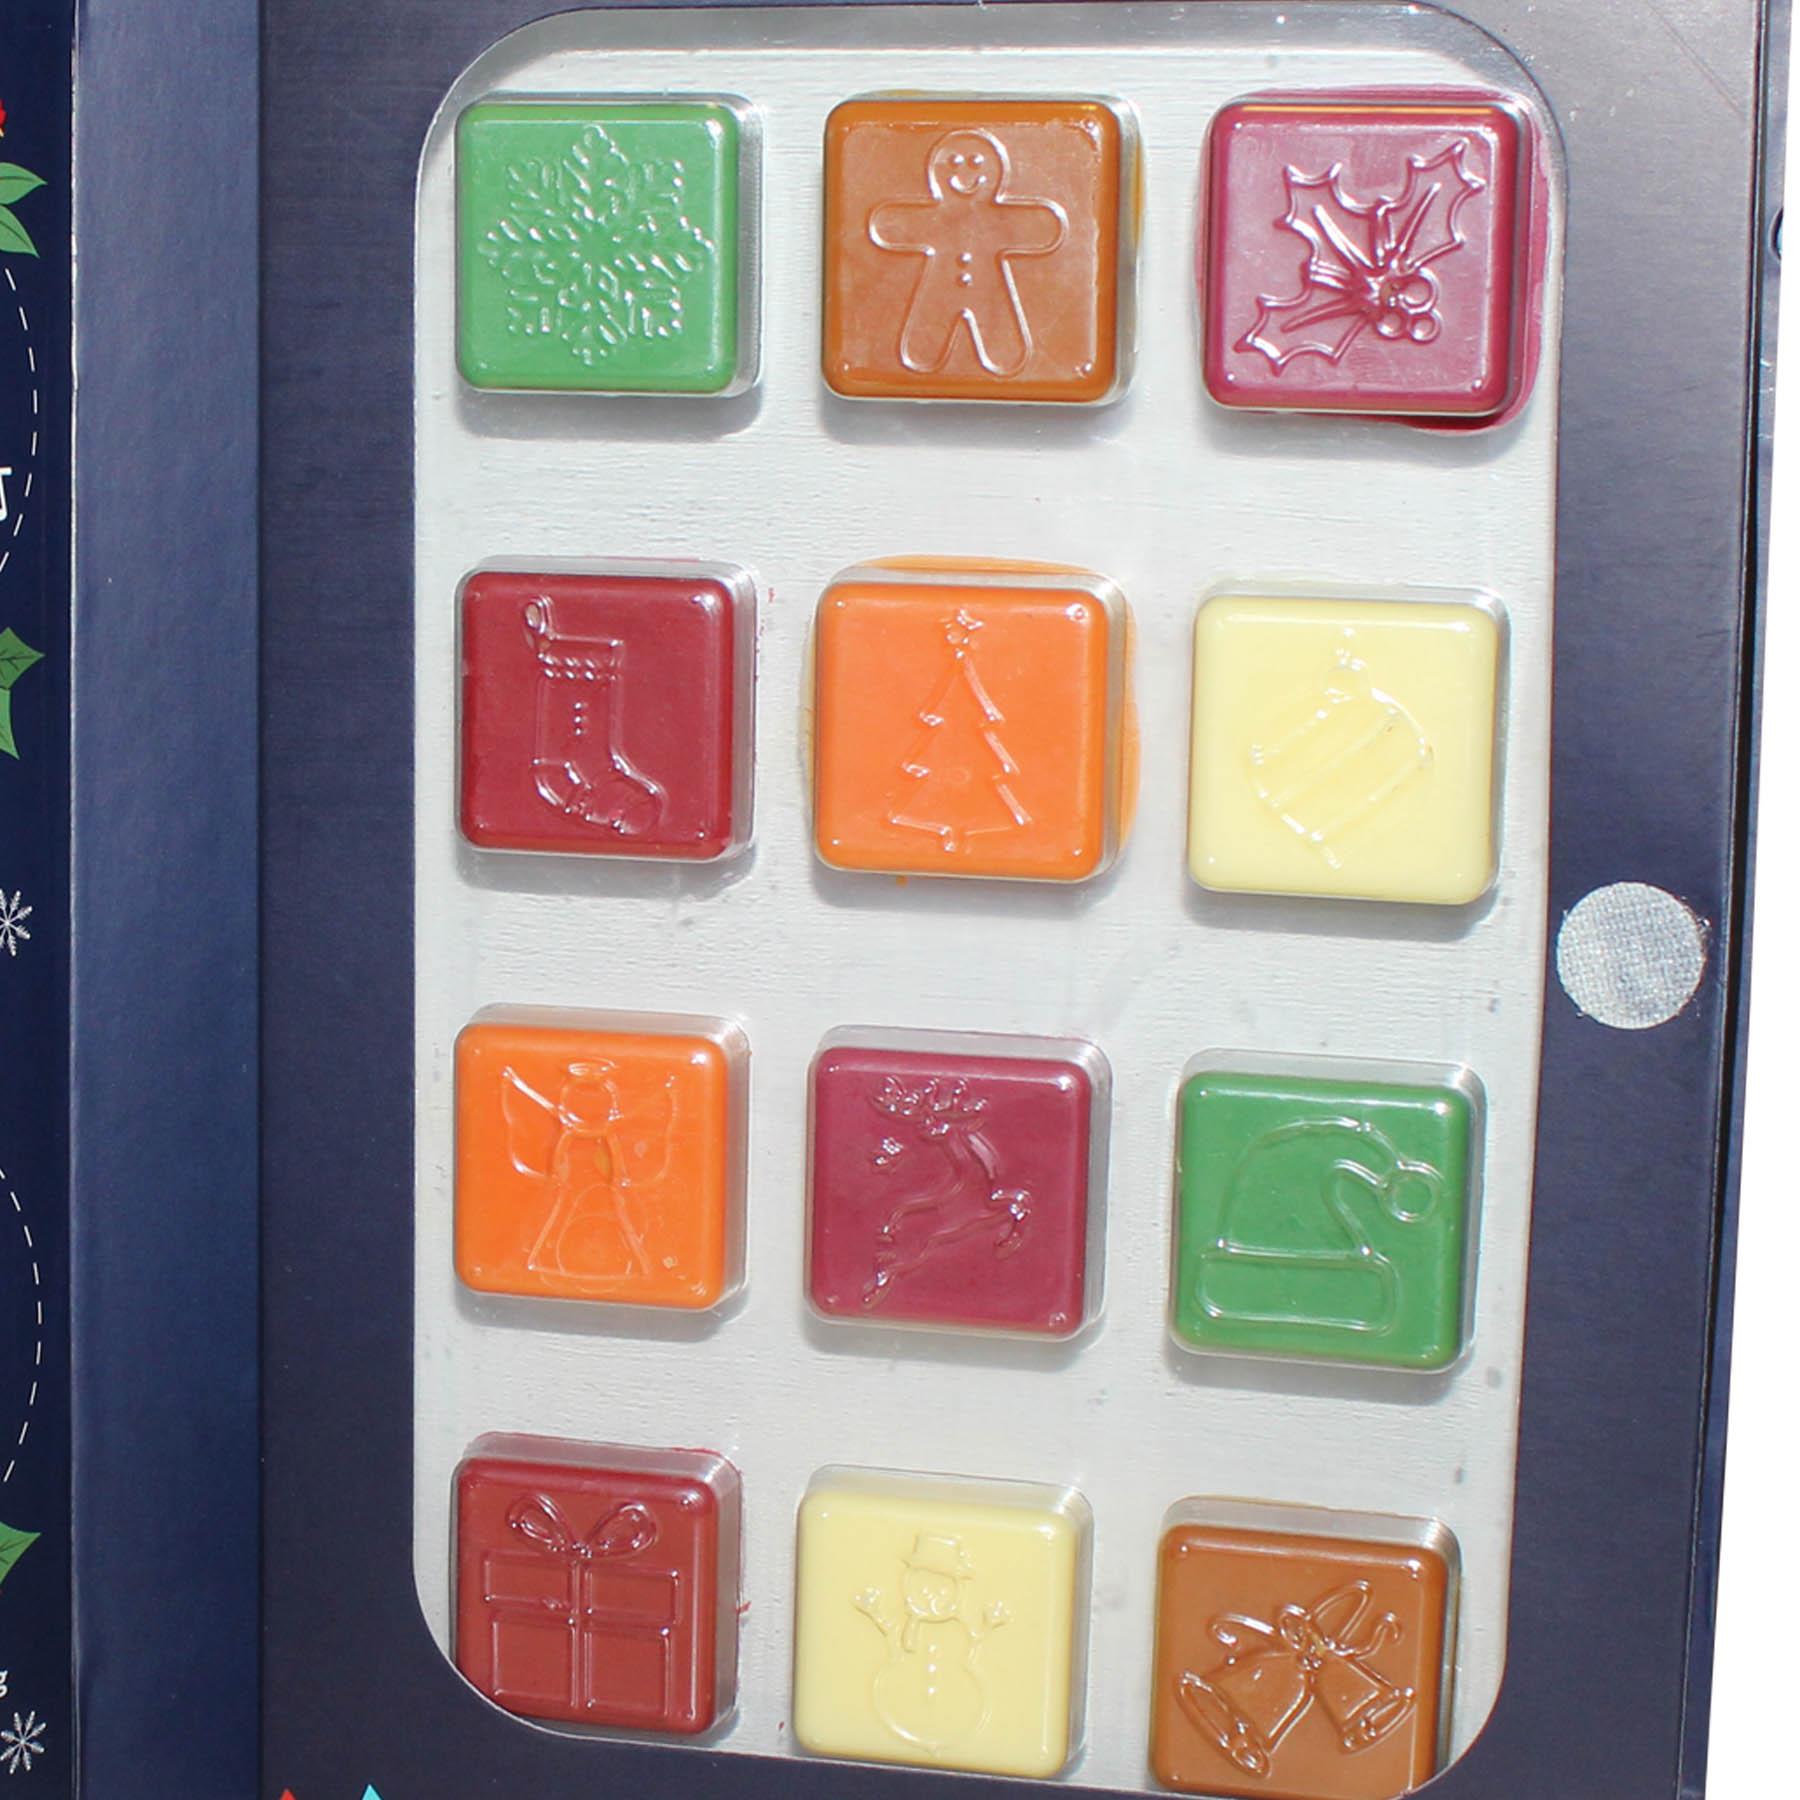 12 Days of Christmas Scented Wax Melts Advent Calendar